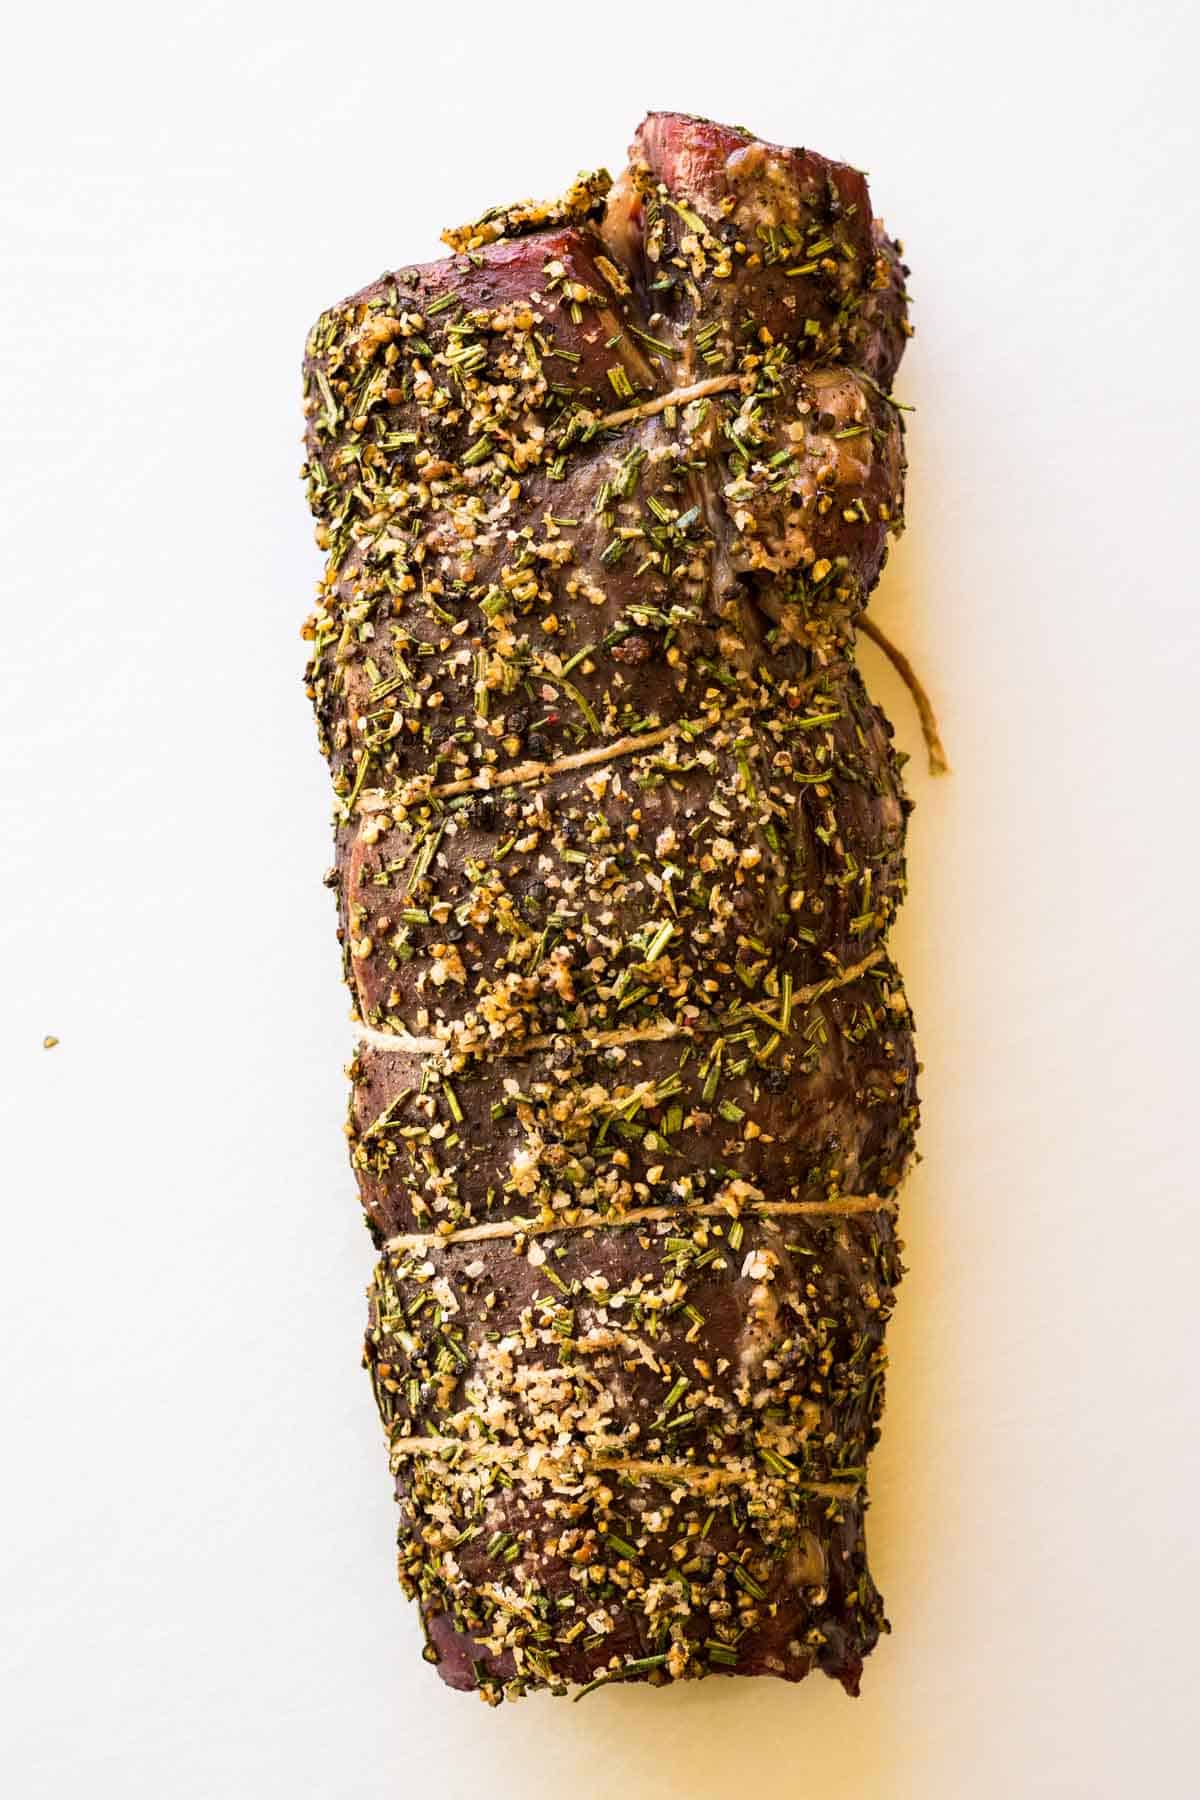 A whole herb crusted beef tenderloin wrapped with butcher's twine.